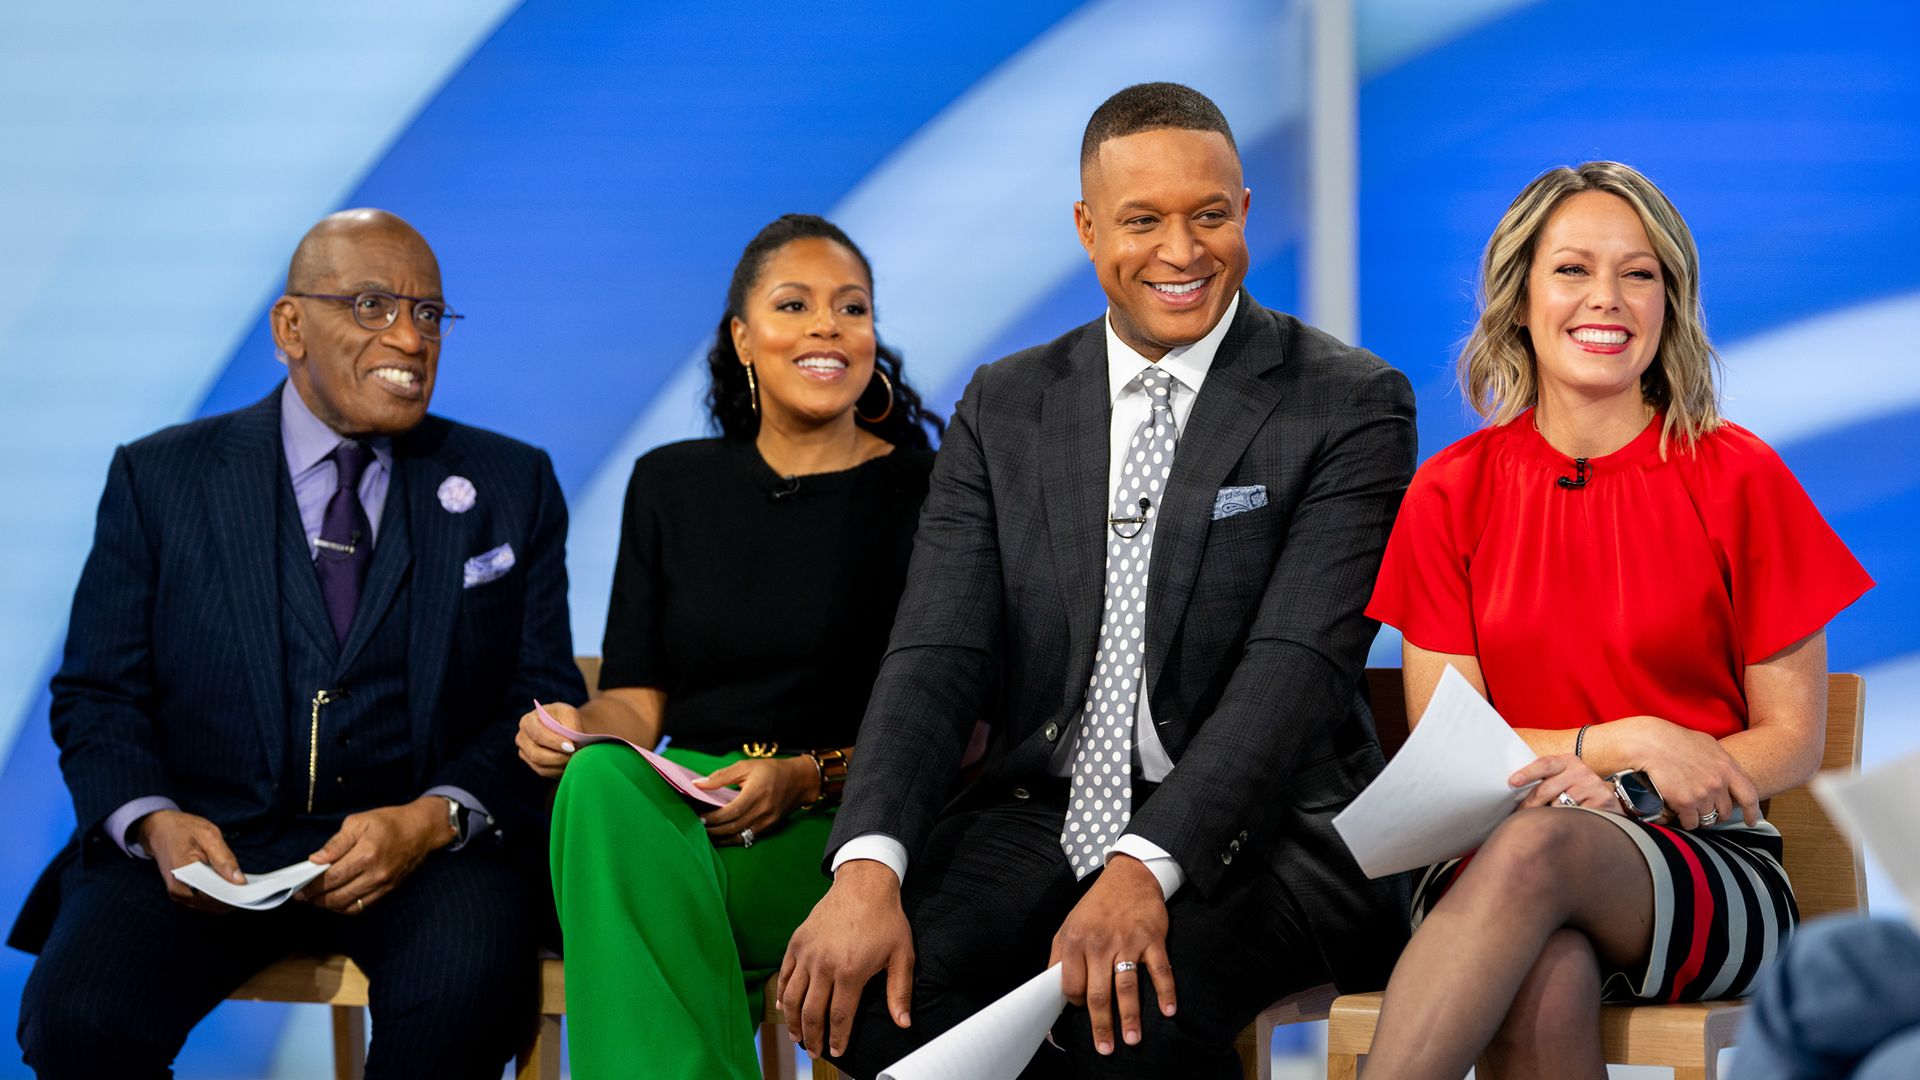 Today Show hosts can't help but laugh at mishap that leaves them spinning